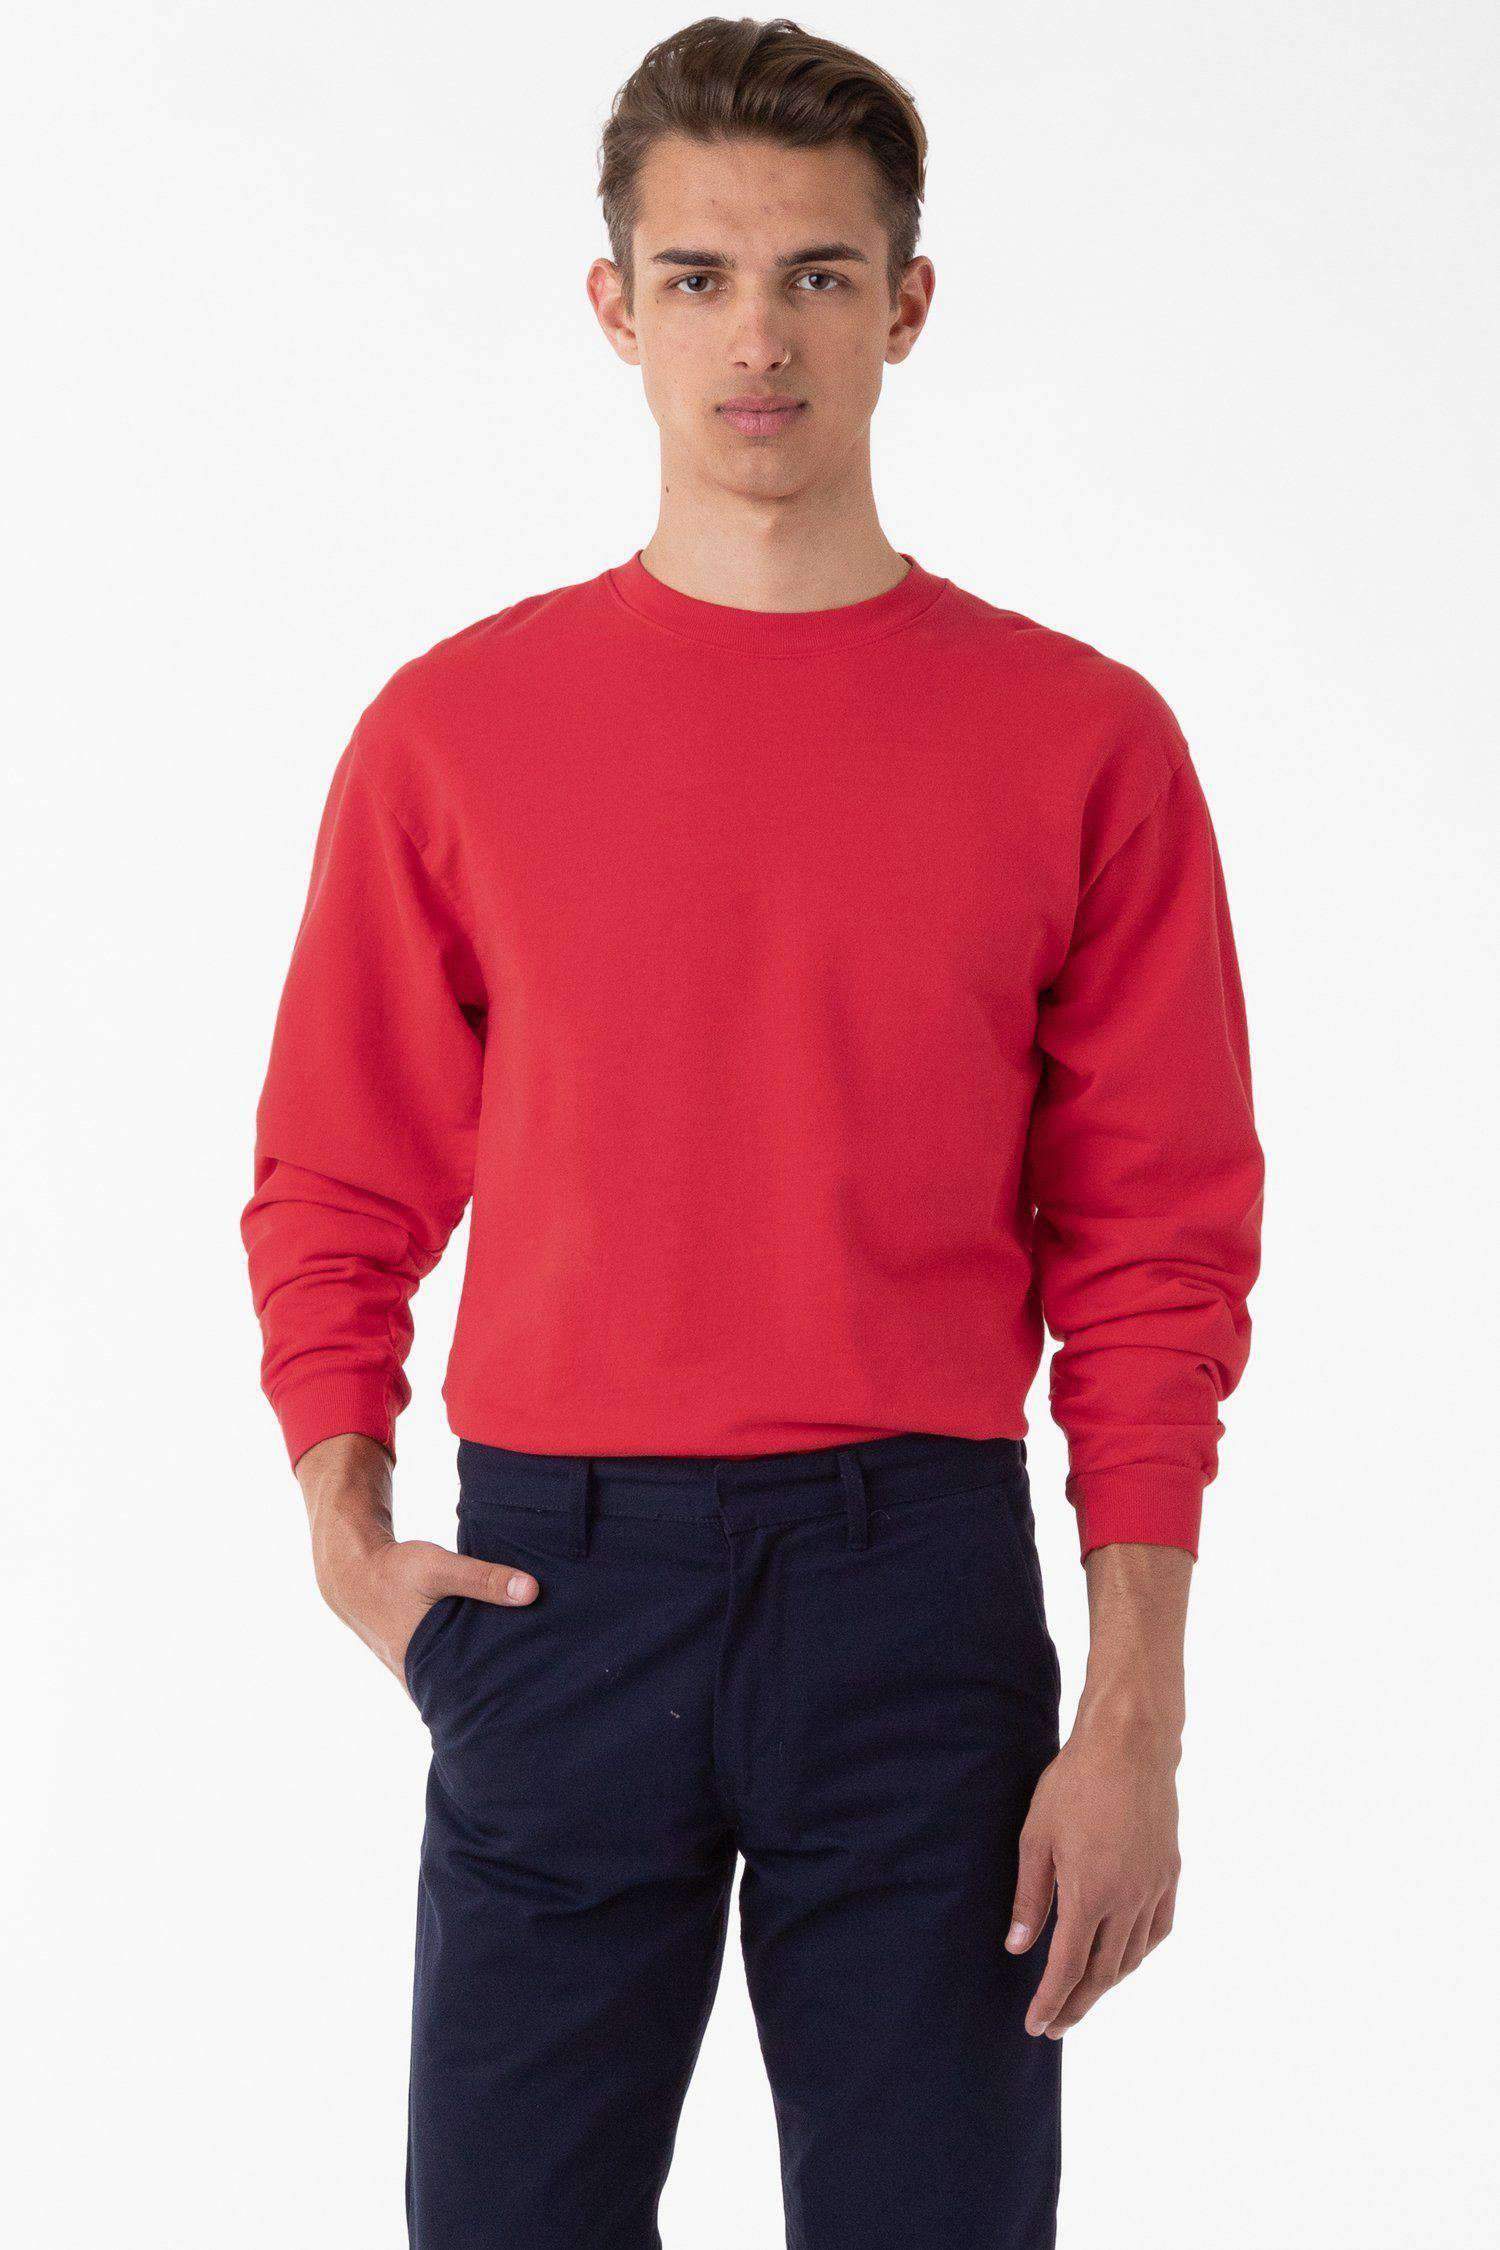 MWT07GD - Long Sleeve Garment Dye French Terry Pullover Sweatshirt Los Angeles Apparel Tomato XS 